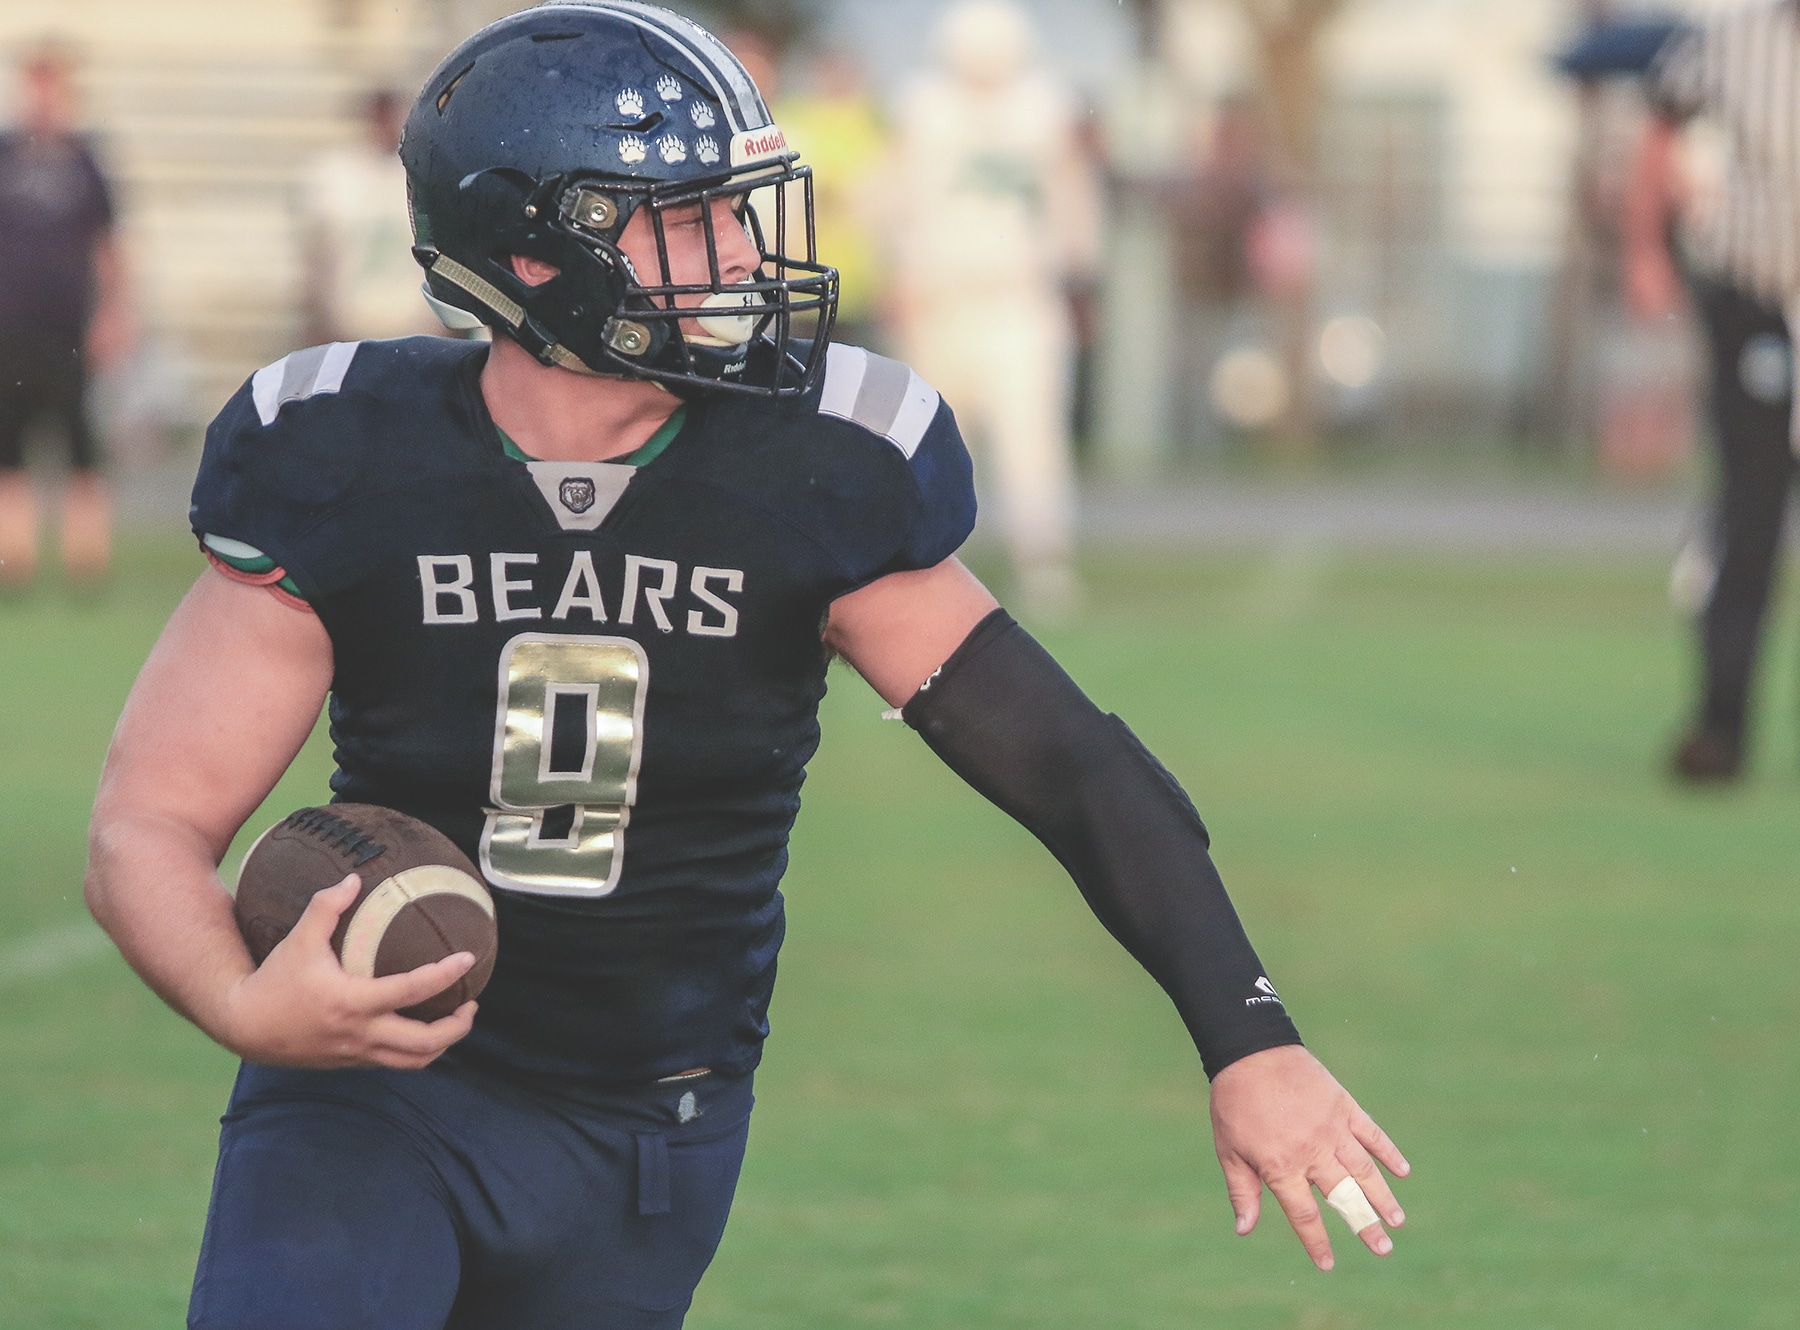 Bears’ Senior Kaleb Morrison rushes the ball during Friday night’s game against Gulf. Morrison is a guard and defensive tackle. To date he has 18 tackles. He rushed 39 yards during the Friday night’s game against Gulf.